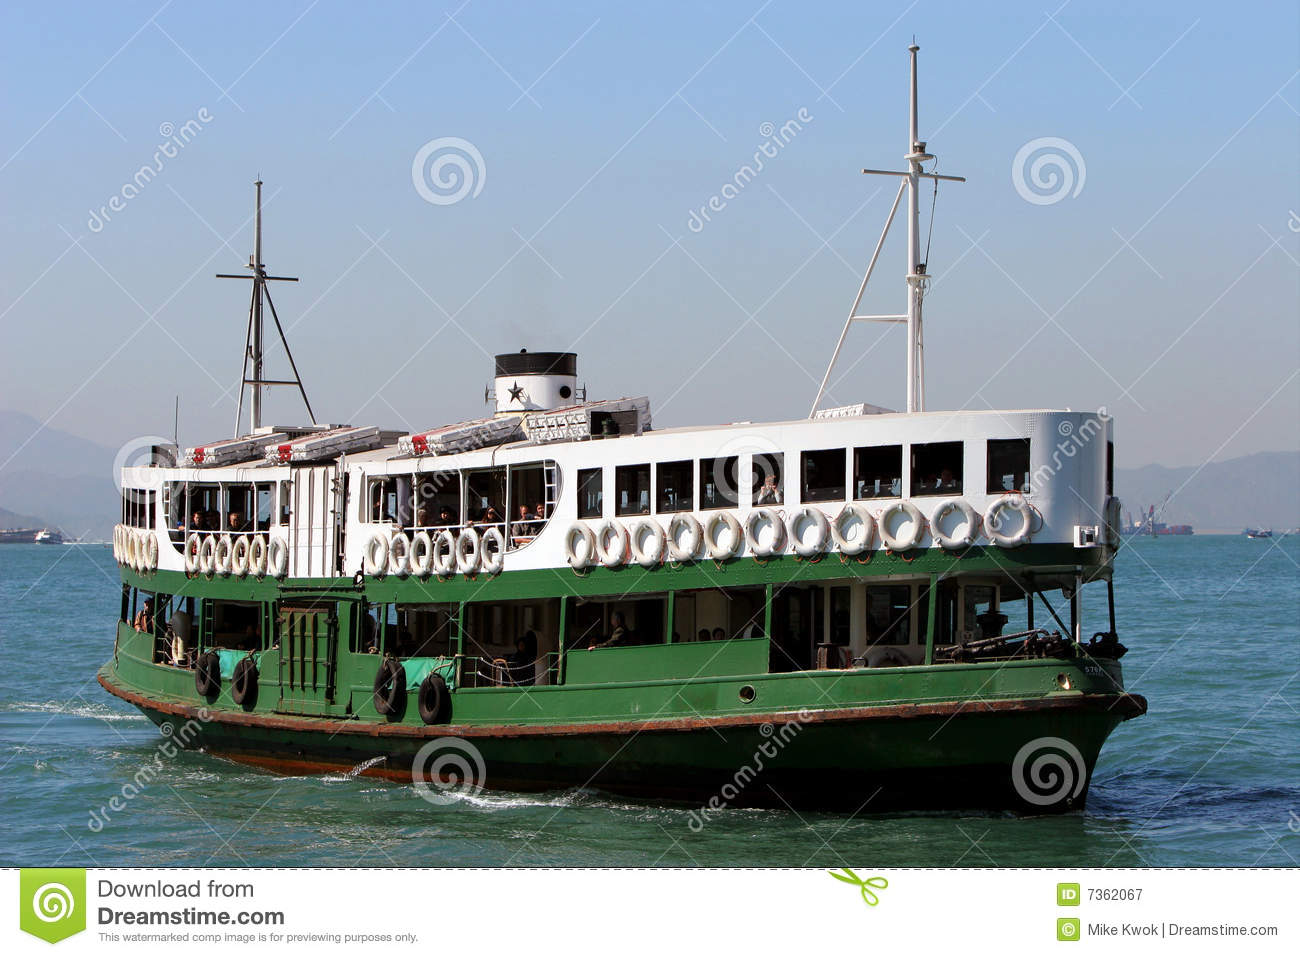 Hong Kong   Star Ferry Royalty Free Stock Photography   Image  7362067